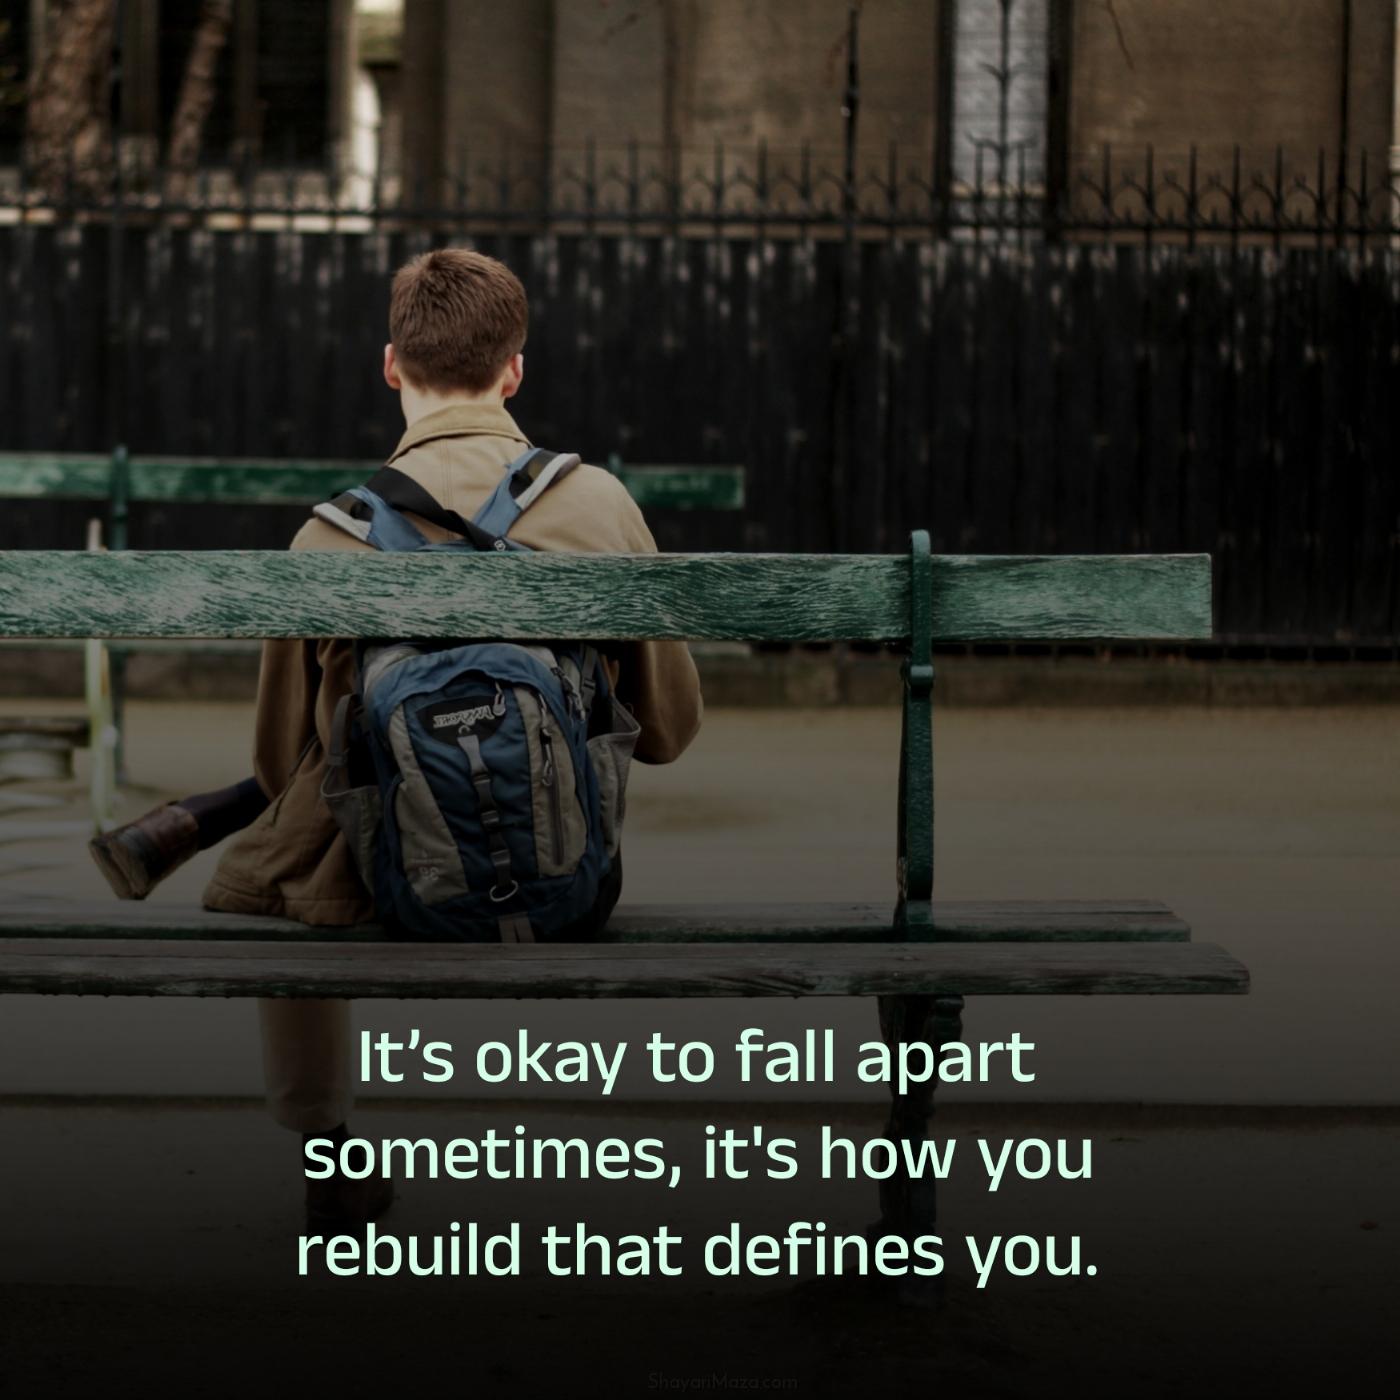 Its okay to fall apart sometimes it's how you rebuild